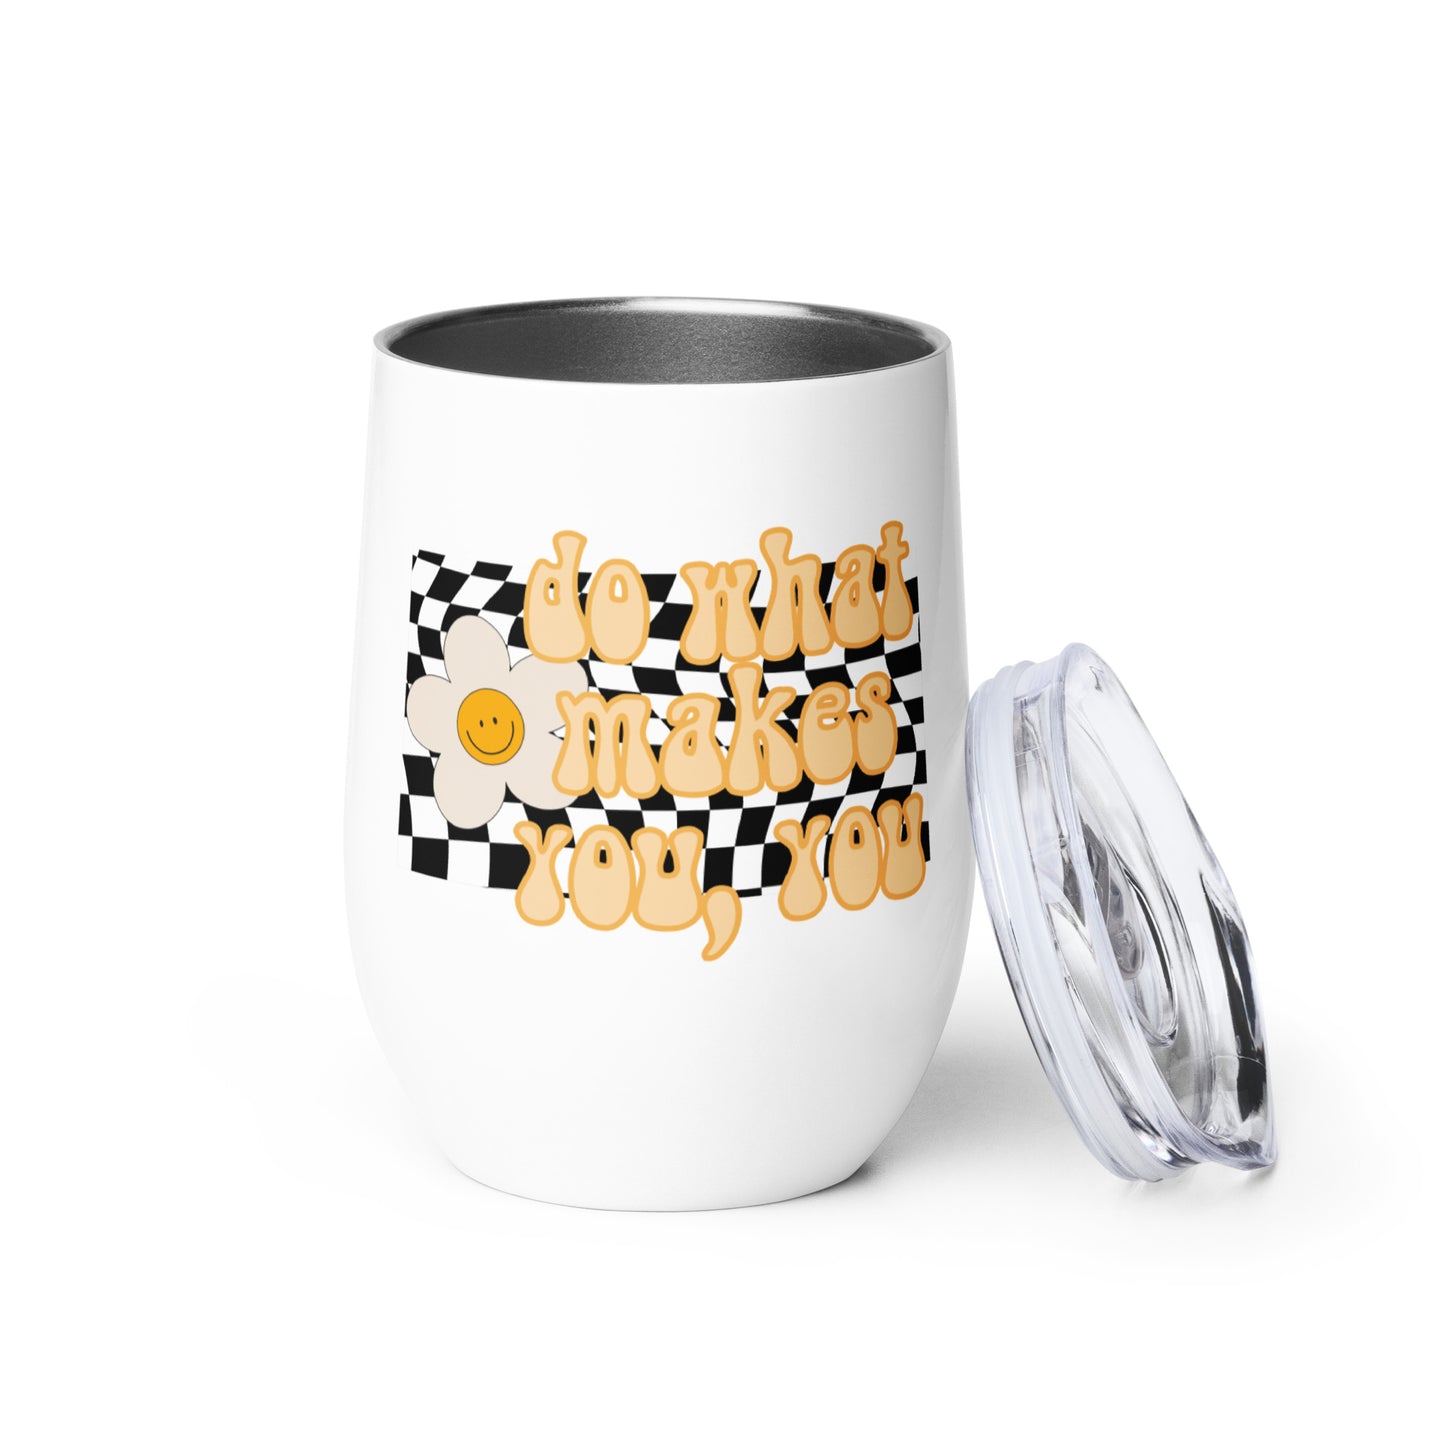 do what makes you you - stainless steel wine tumbler